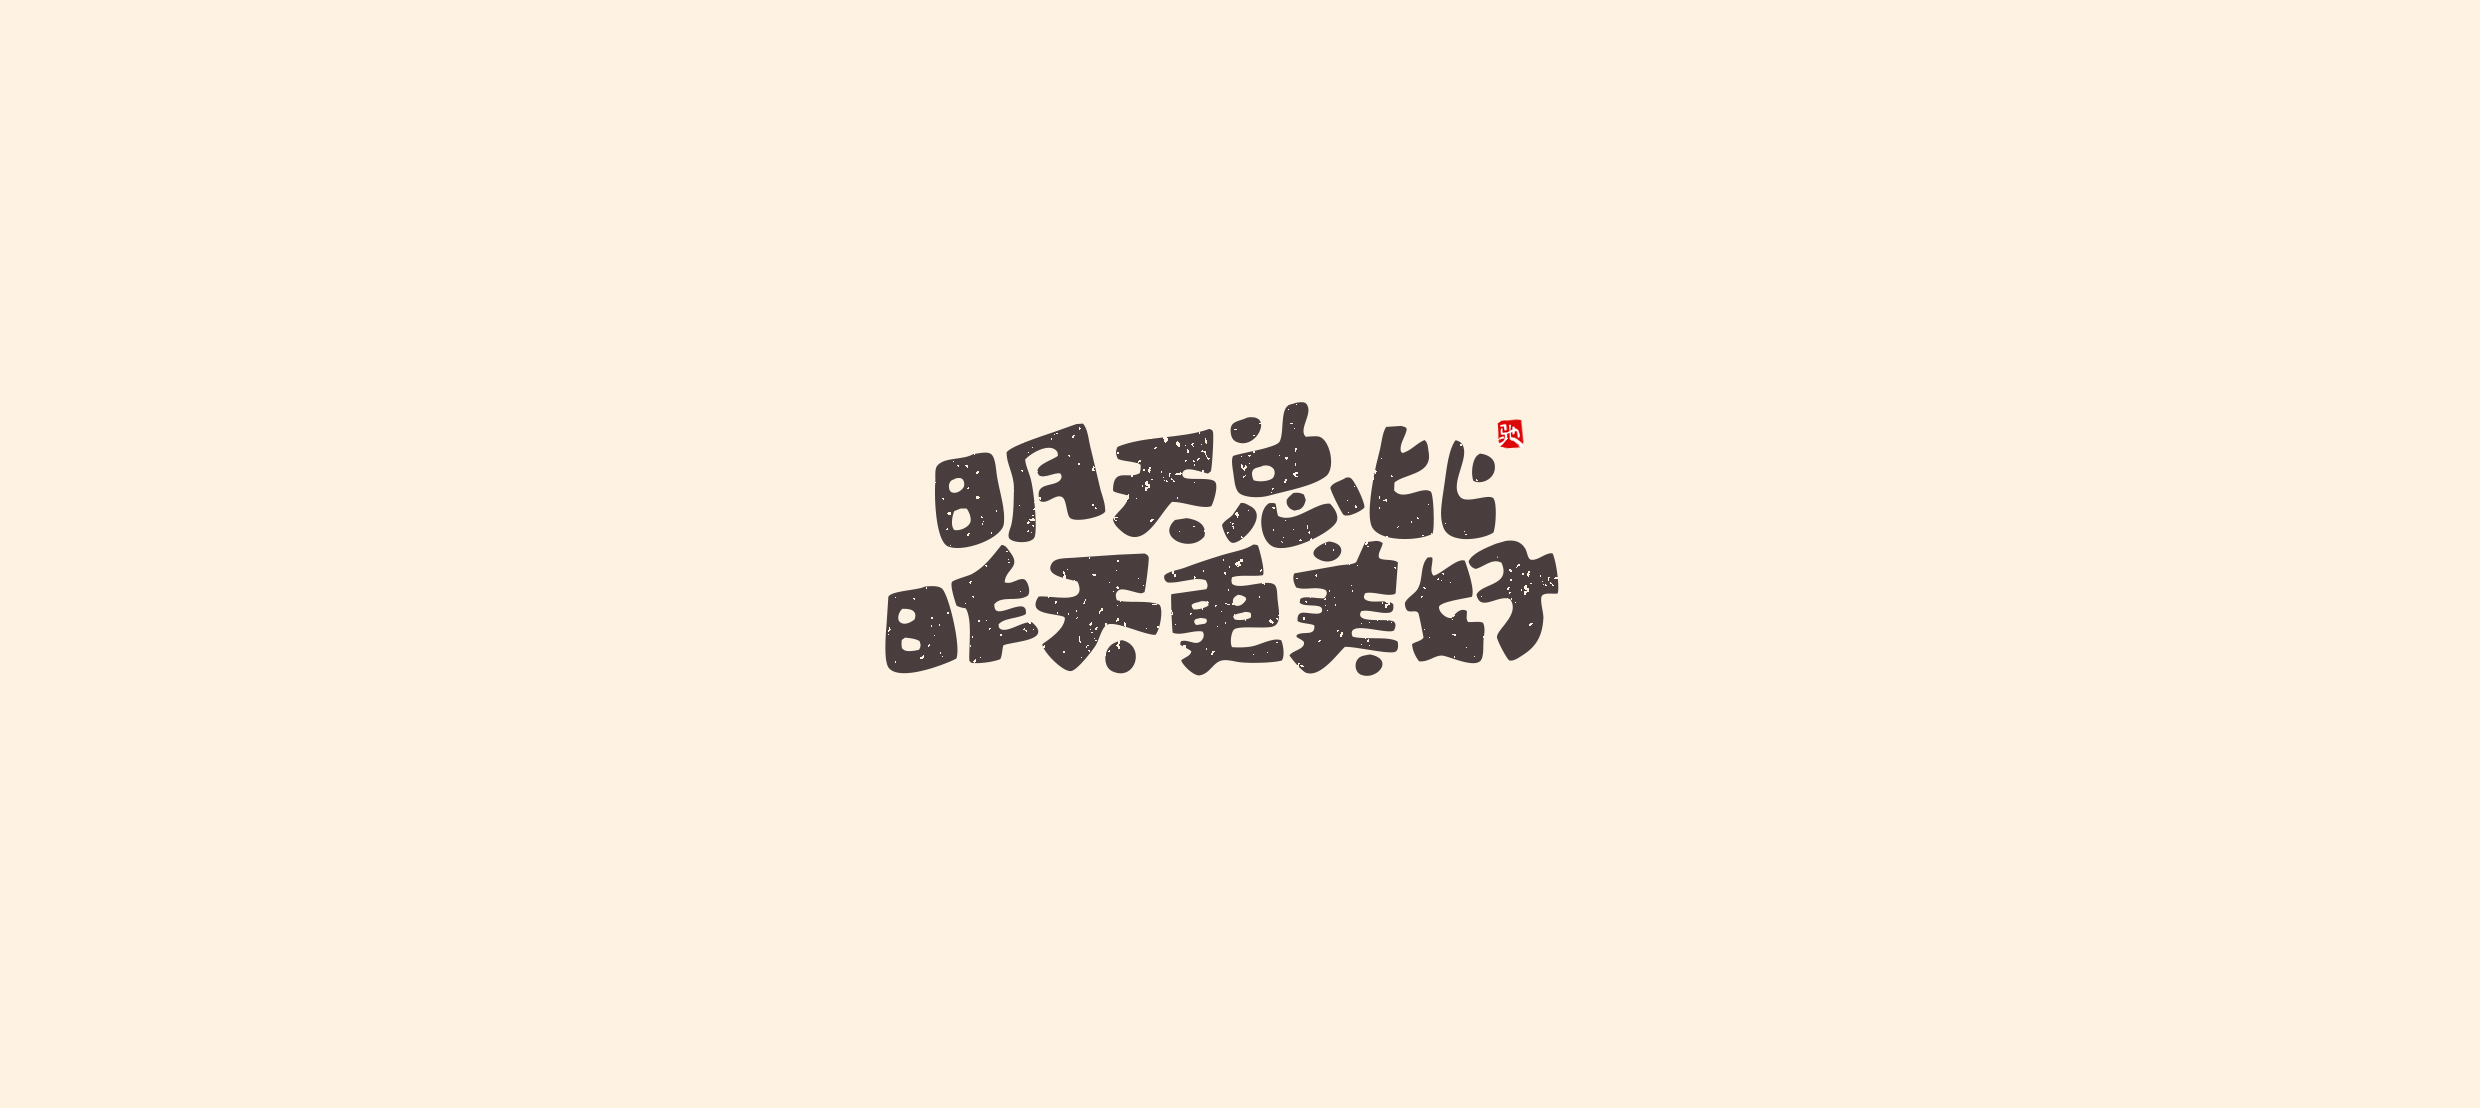 9P Collection of the latest Chinese font design schemes in 2021 #.218